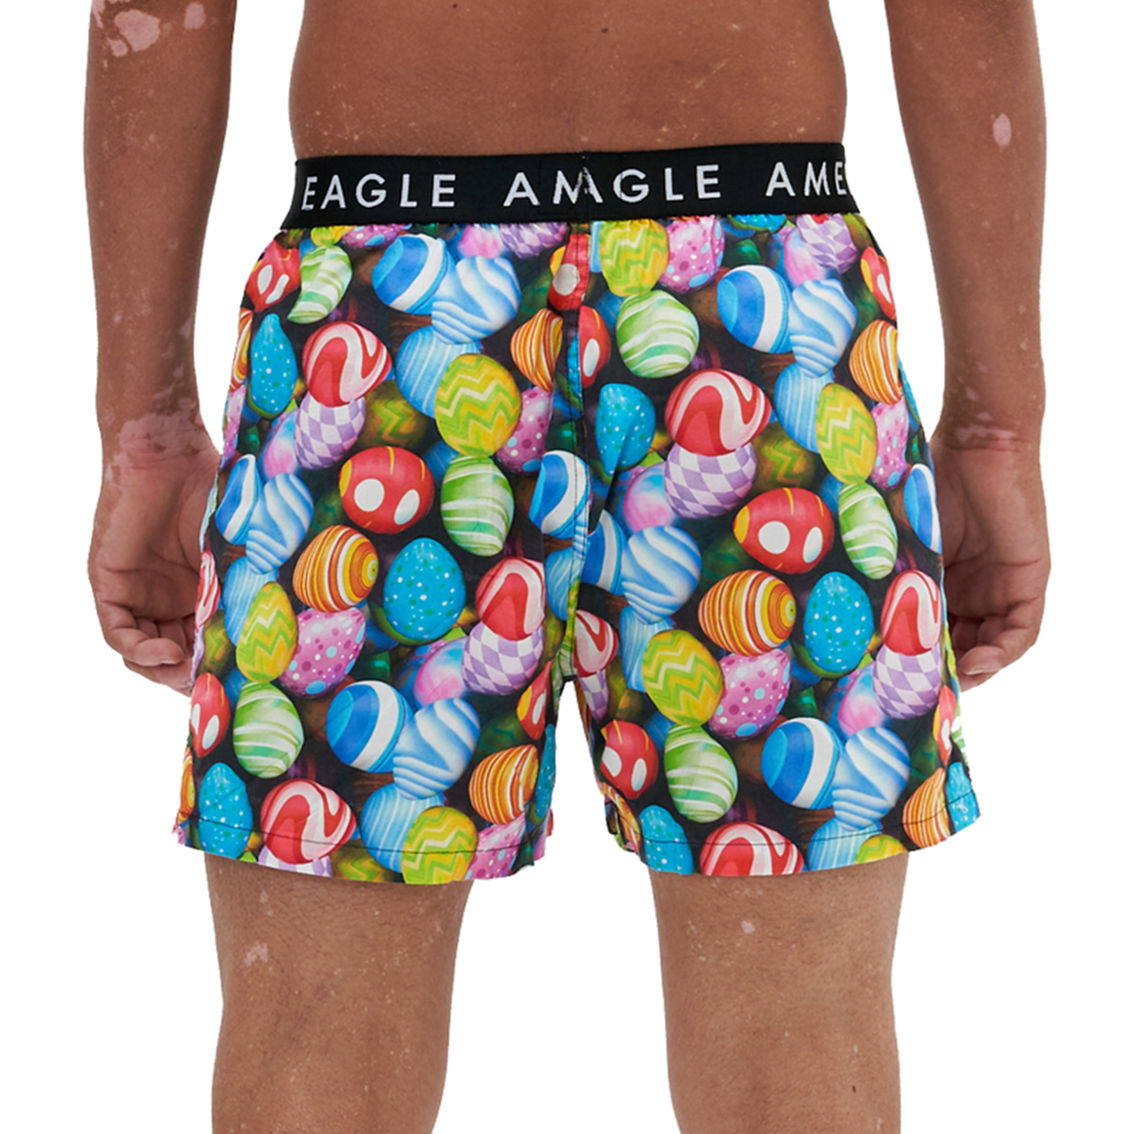 American Eagle Easter Eggs Stretch Boxer Shorts - Image 2 of 5